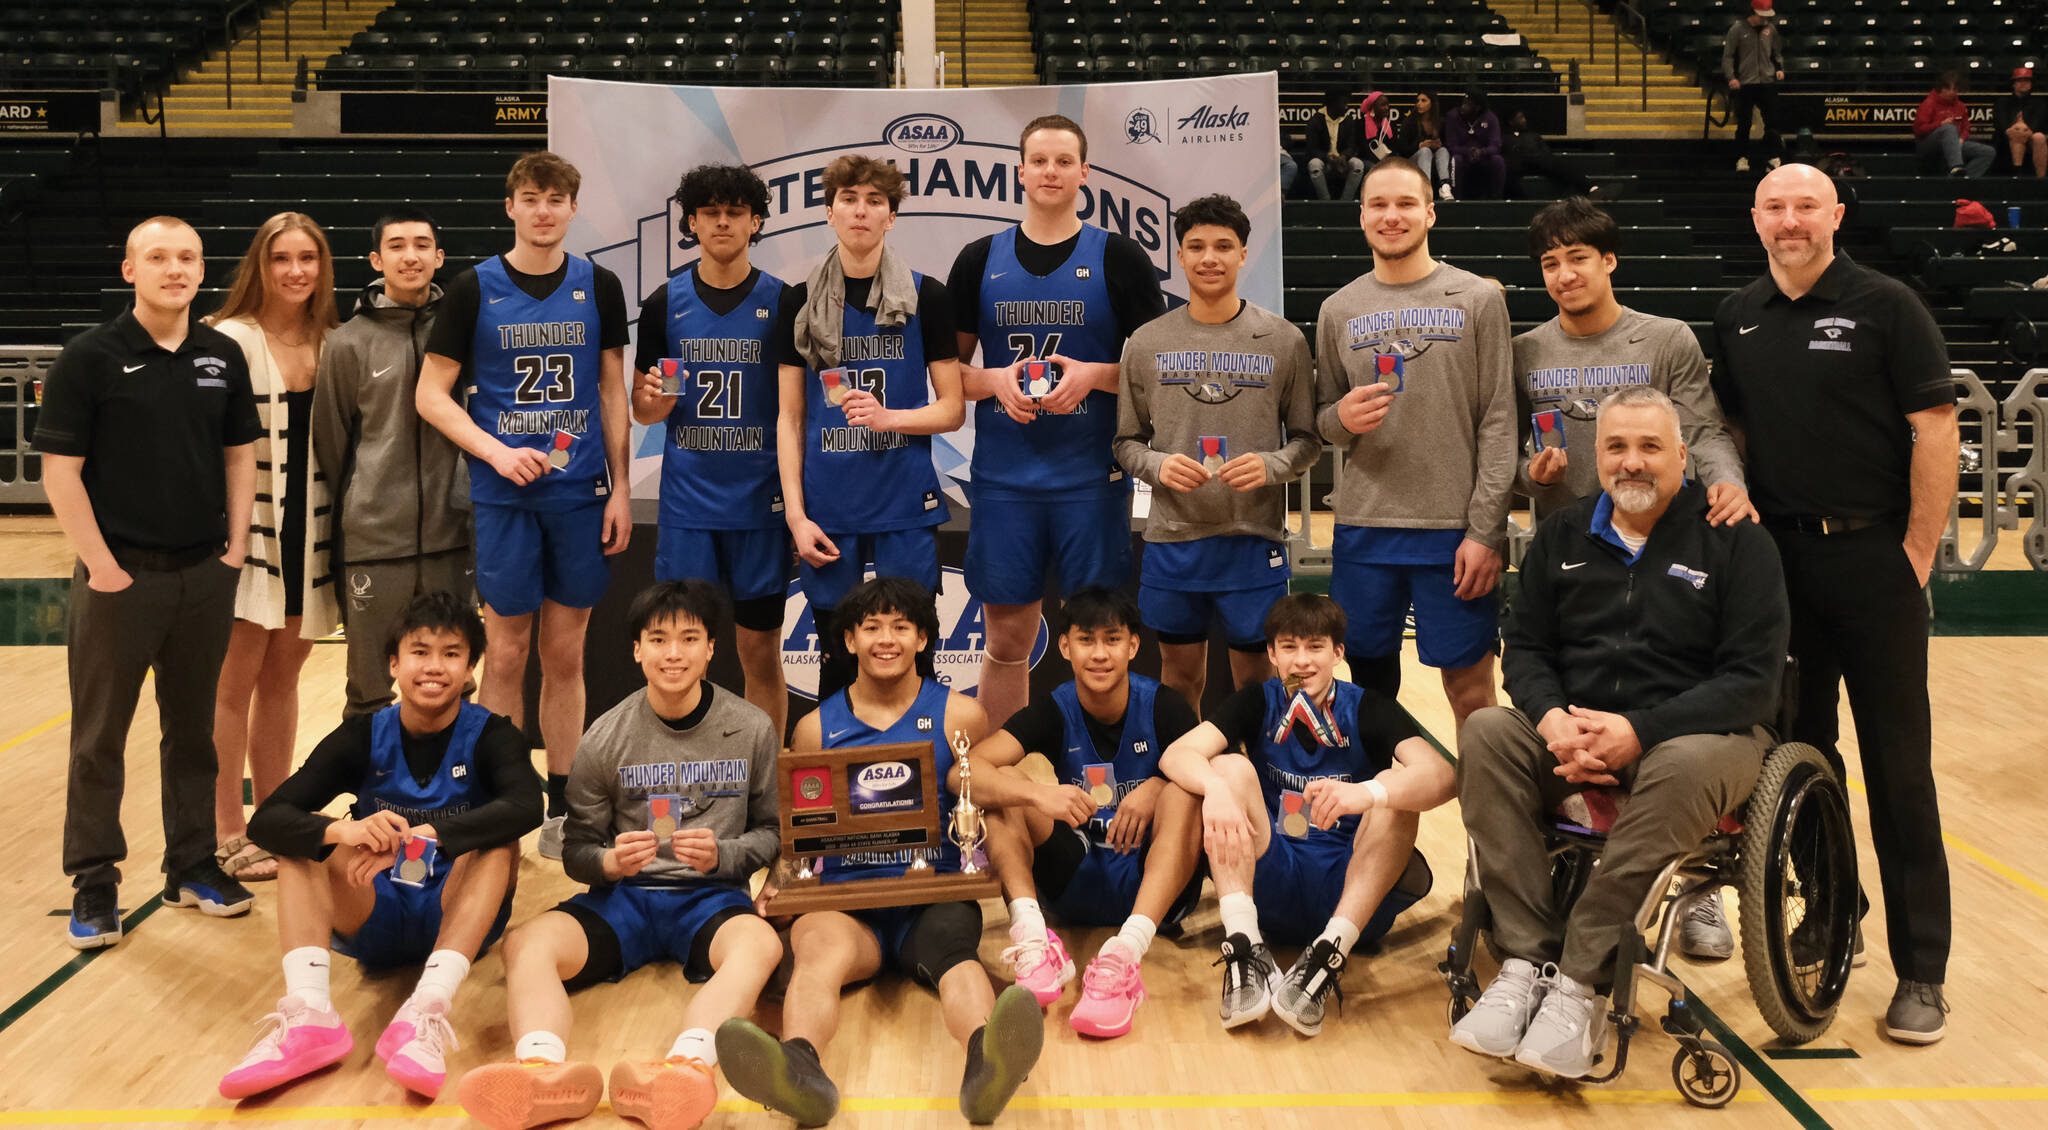 The Thunder Mountain Falcons boys basketball team poses with their runner-up trophy after falling to East Anchorage 60-34 in the title game of the 2024 ASAA March Madness Alaska 4A Boys Basketball State Championship game on Saturday at Anchorage’s Alaska Airlines Center. (Klas Stolpe / For the Juneau Empire)